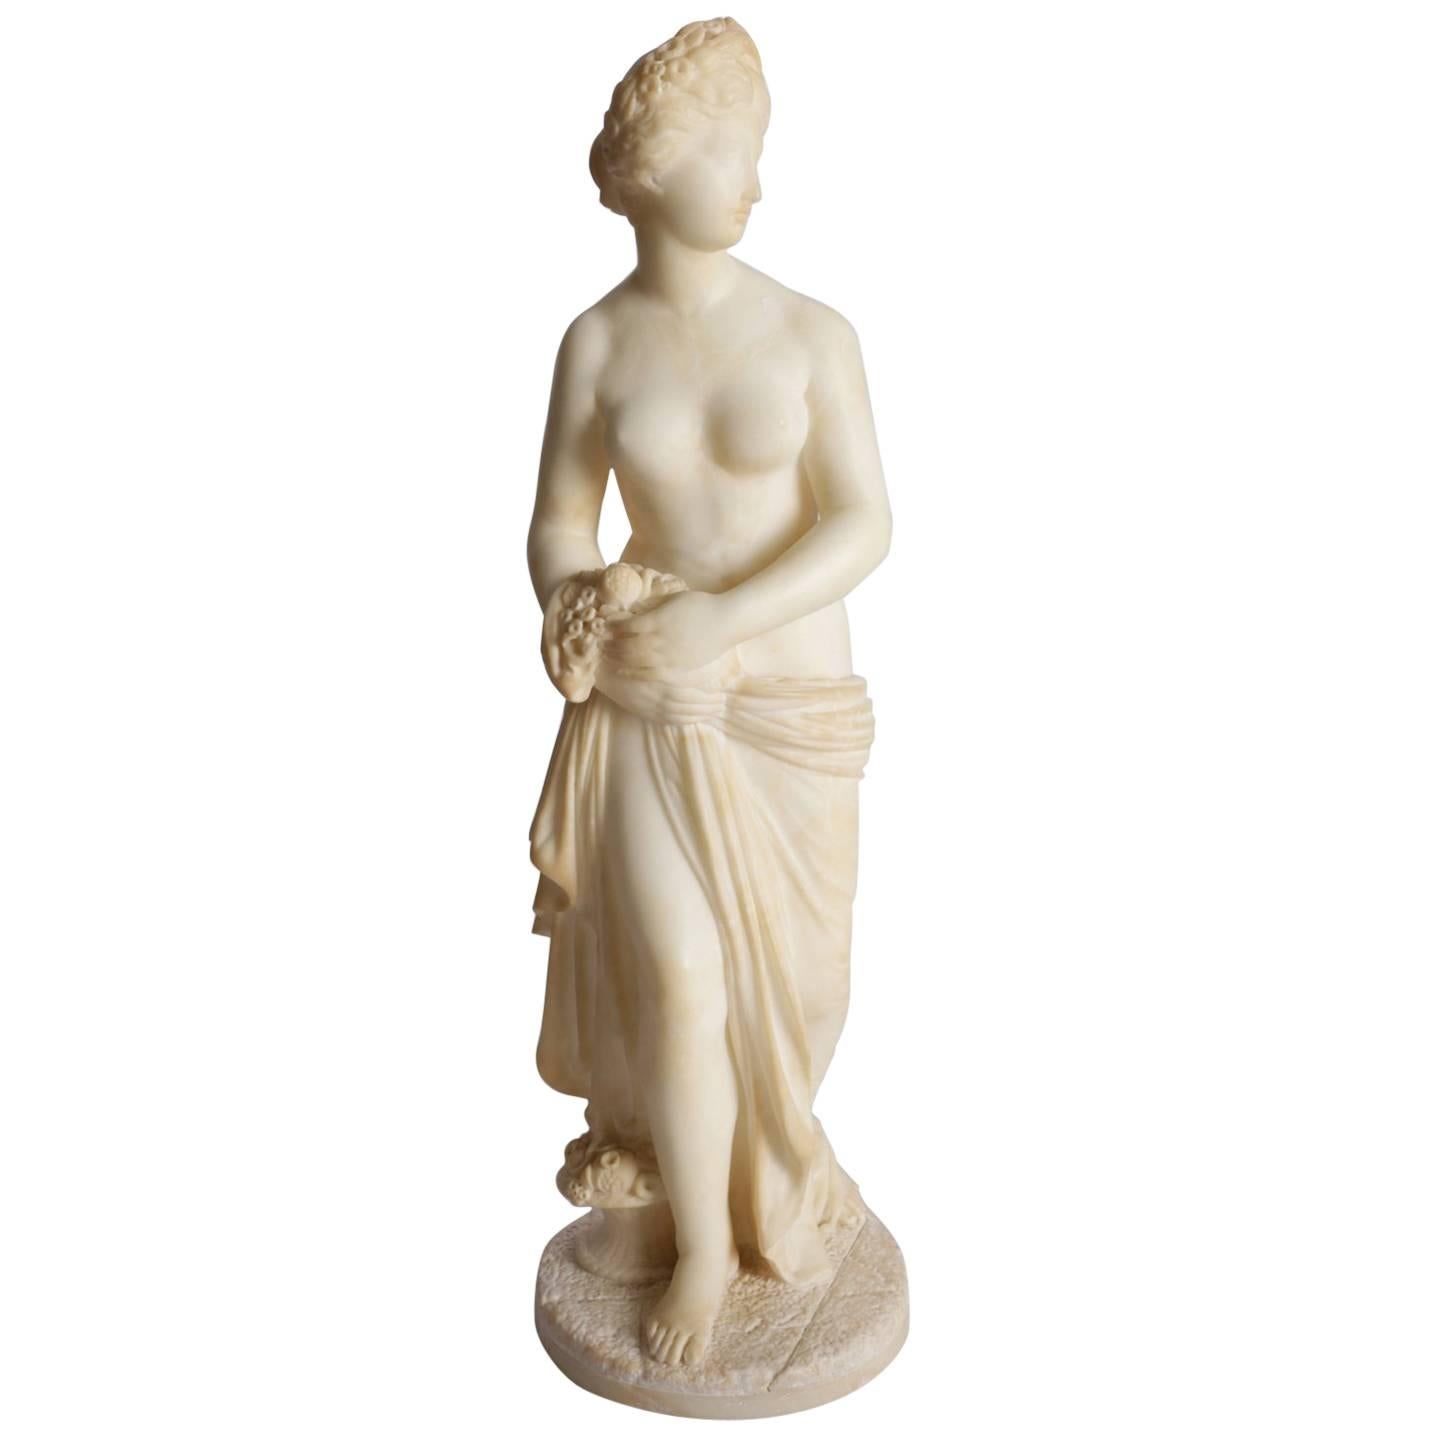 Antique Italian Carved Alabaster Classical Partial Nude Sculpture of Woman